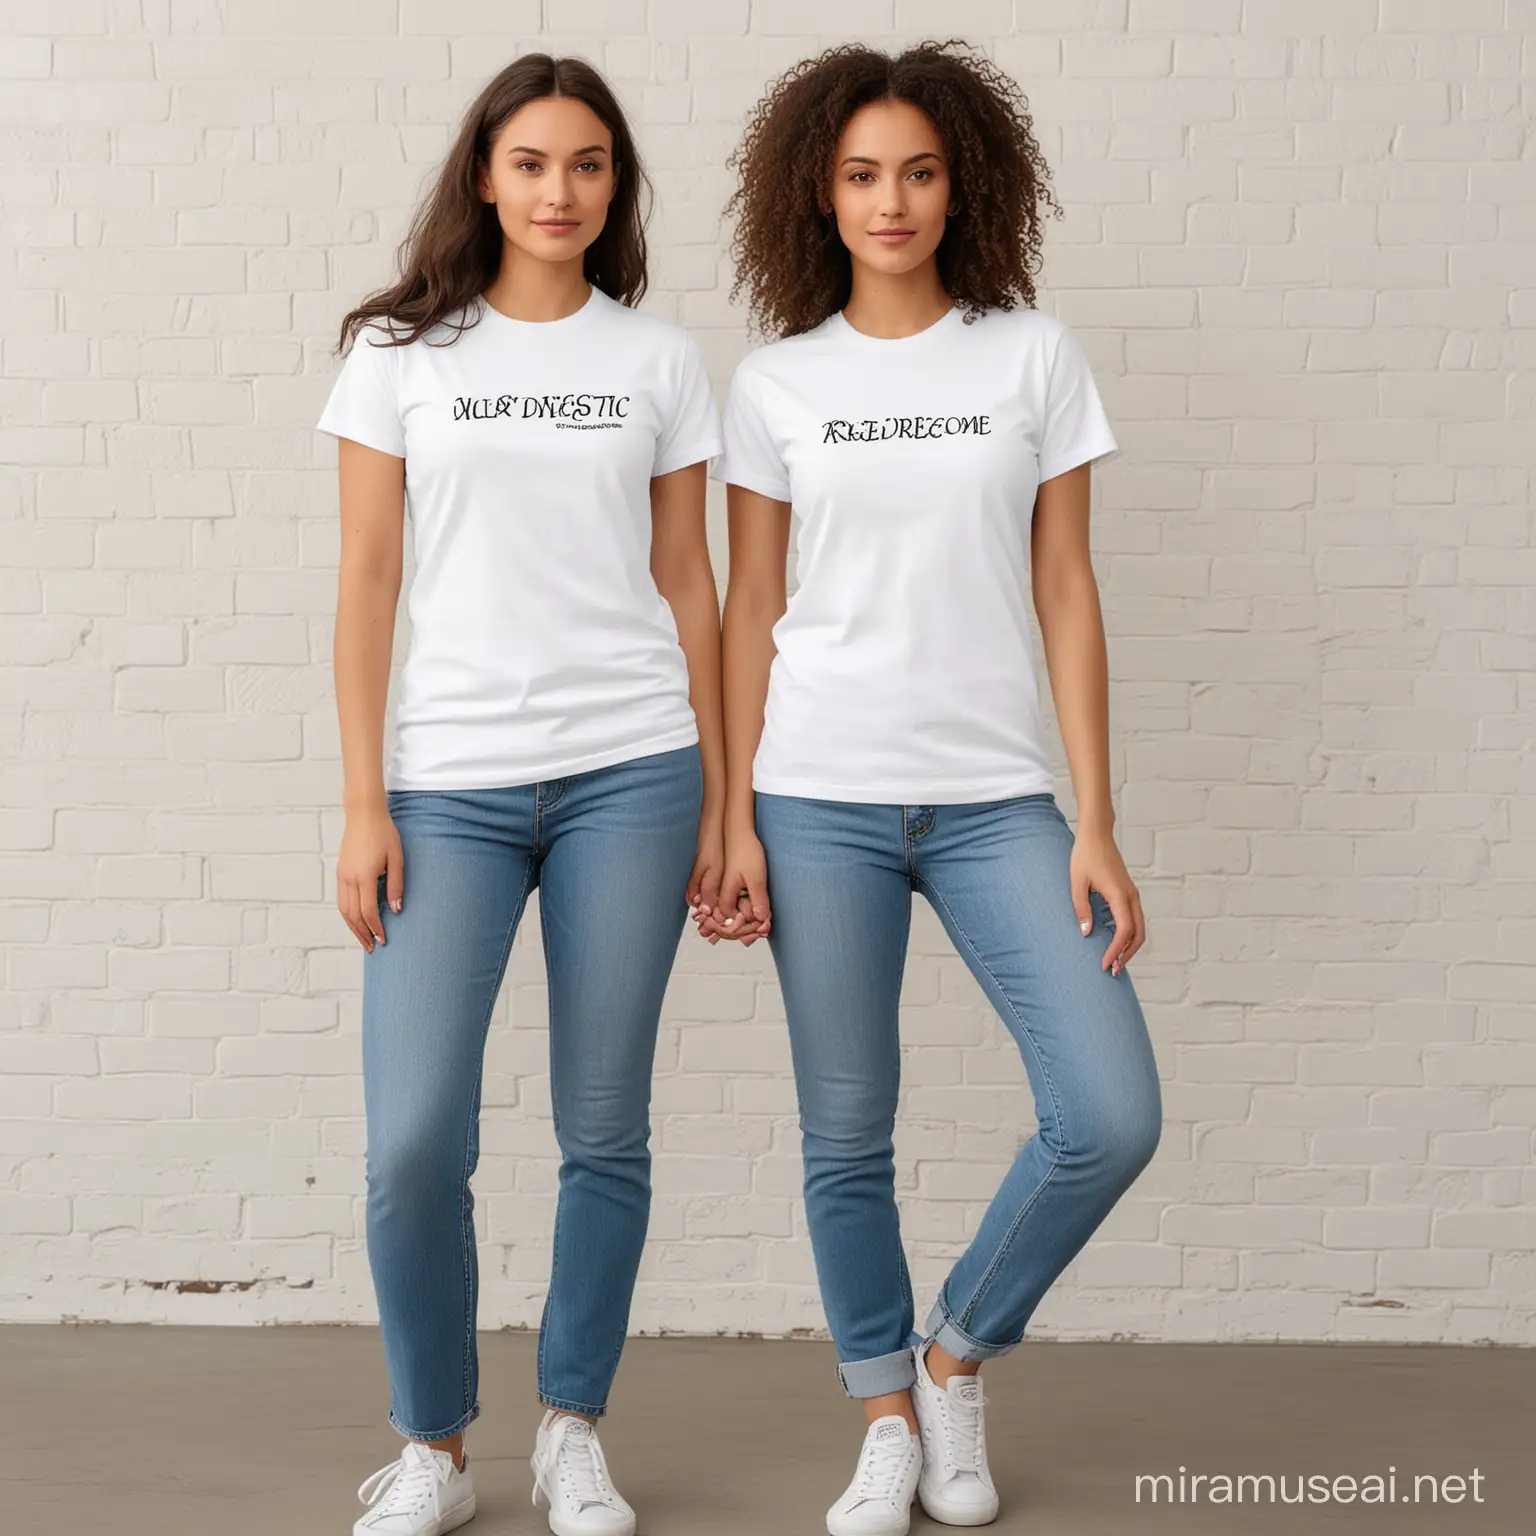 Bella + canvas 3001 mockup in white with a blank t-shirt worn by models


